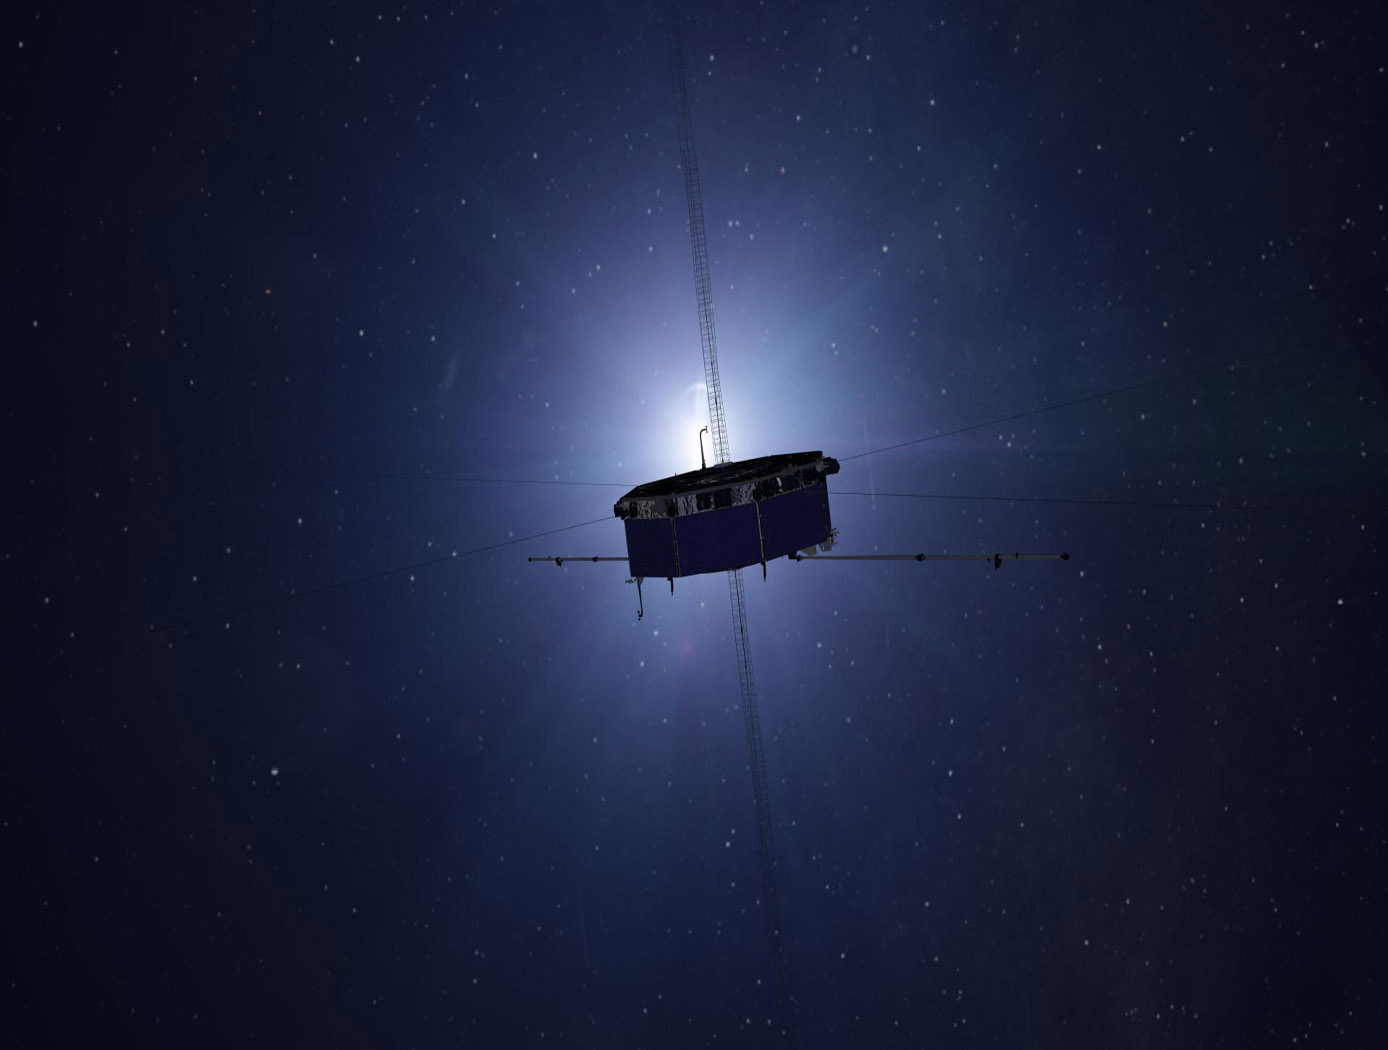 The Magnetospheric Multiscale (MMS) mission is a Solar Terrestrial Probes mission comprising four identically instrumented spacecraft that will use Earth's magnetosphere as a laboratory to study the microphysics of three fundamental plasma processes: magnetic reconnection, energetic particle acceleration, and turbulence. These processes occur in all astrophysical plasma systems but can be studied in situ only in our solar system and most efficiently only in Earth's magnetosphere, where they control the dynamics of the geospace environment and play an important role in the processes known as "space weather."